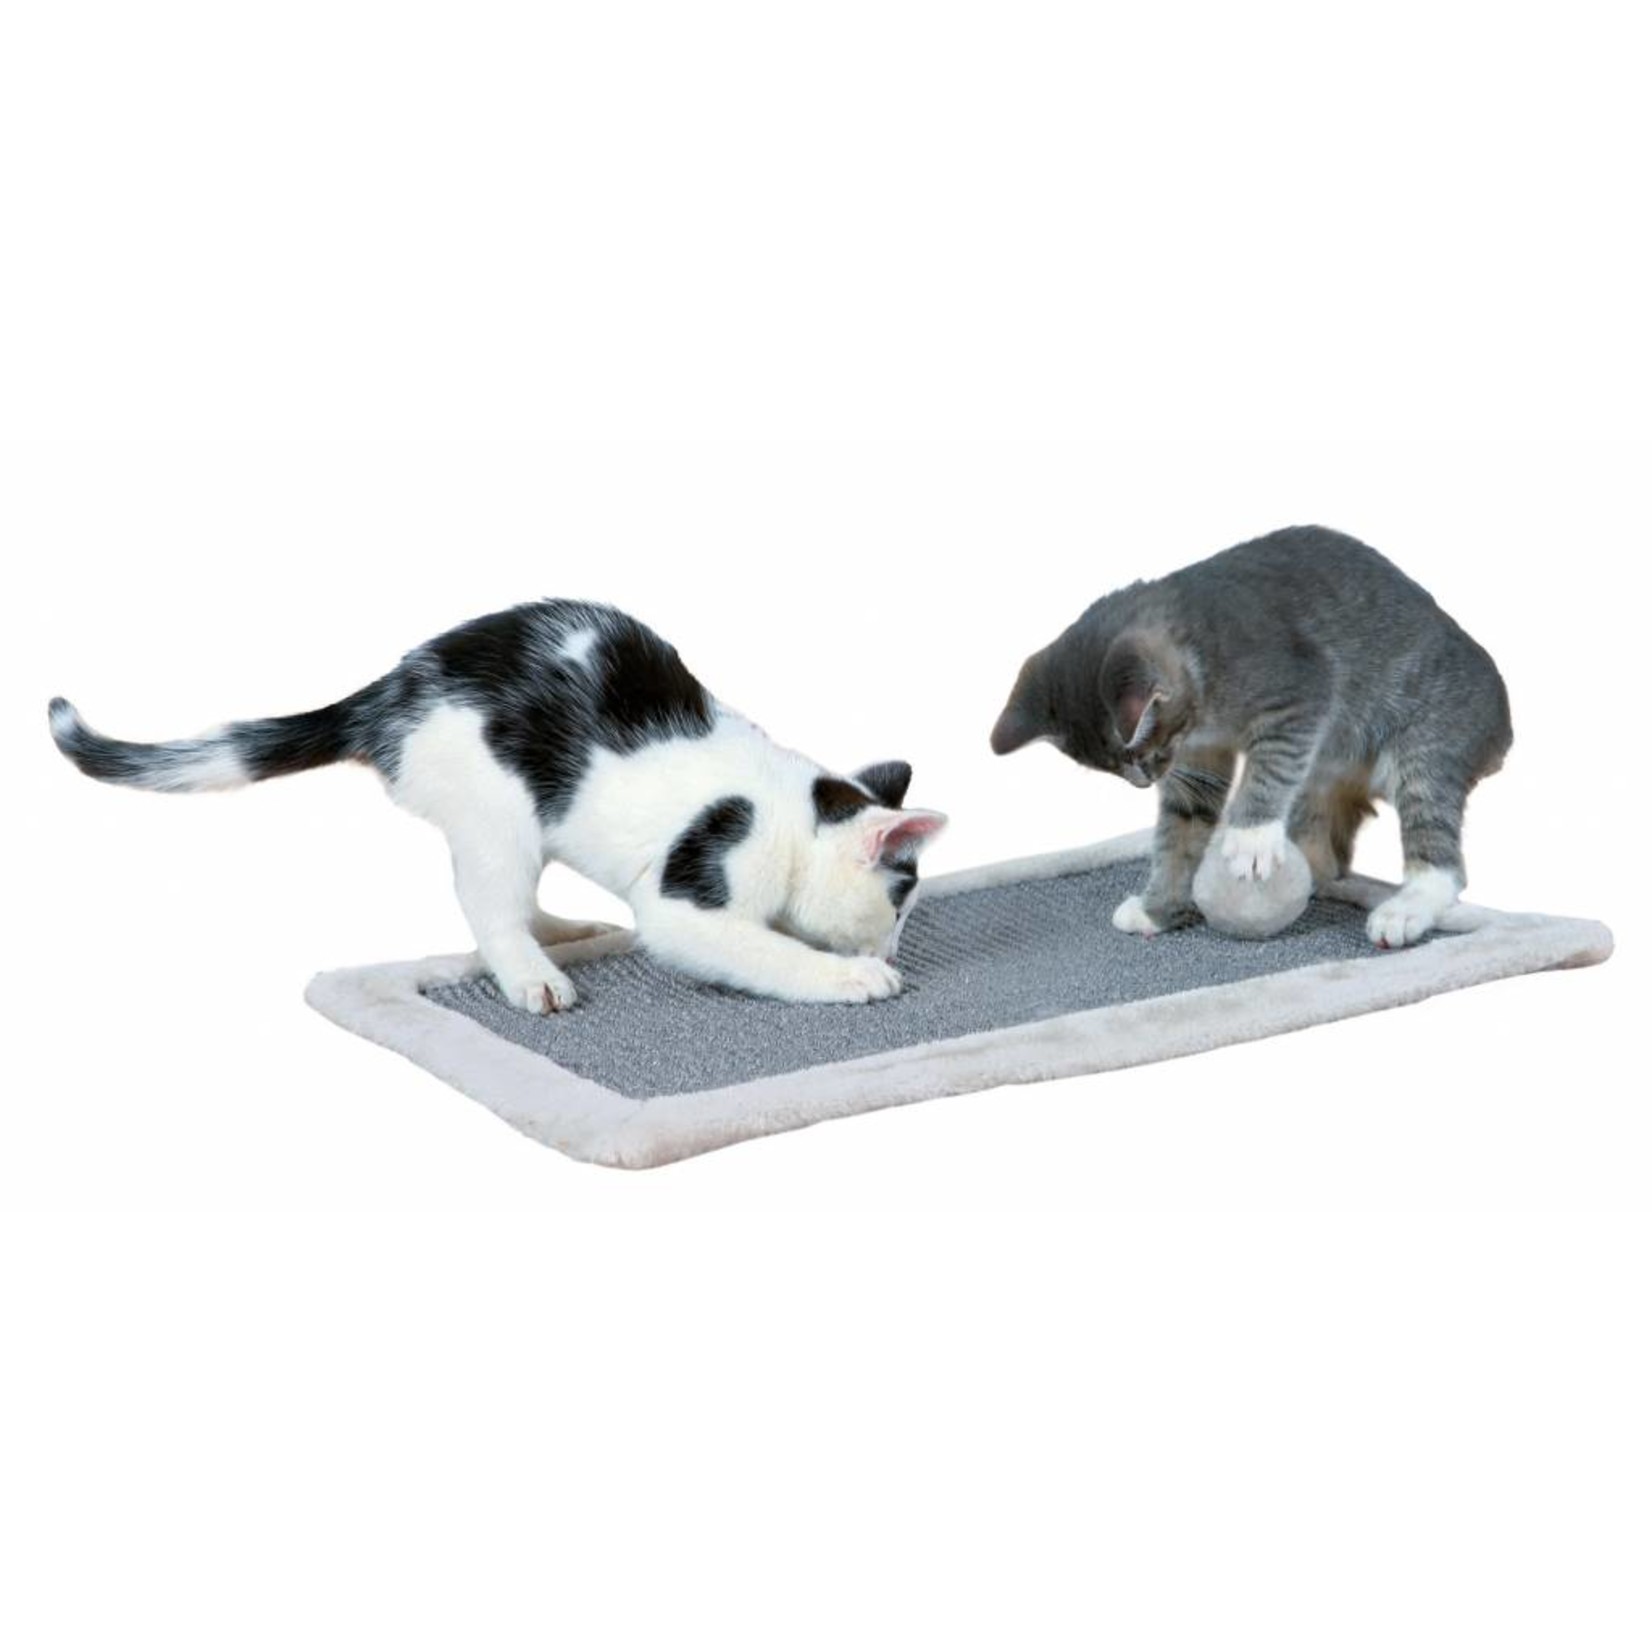 Trixie Cat Scratching Mat with Plush Border and Toy, Light Grey, 55 x 35cm